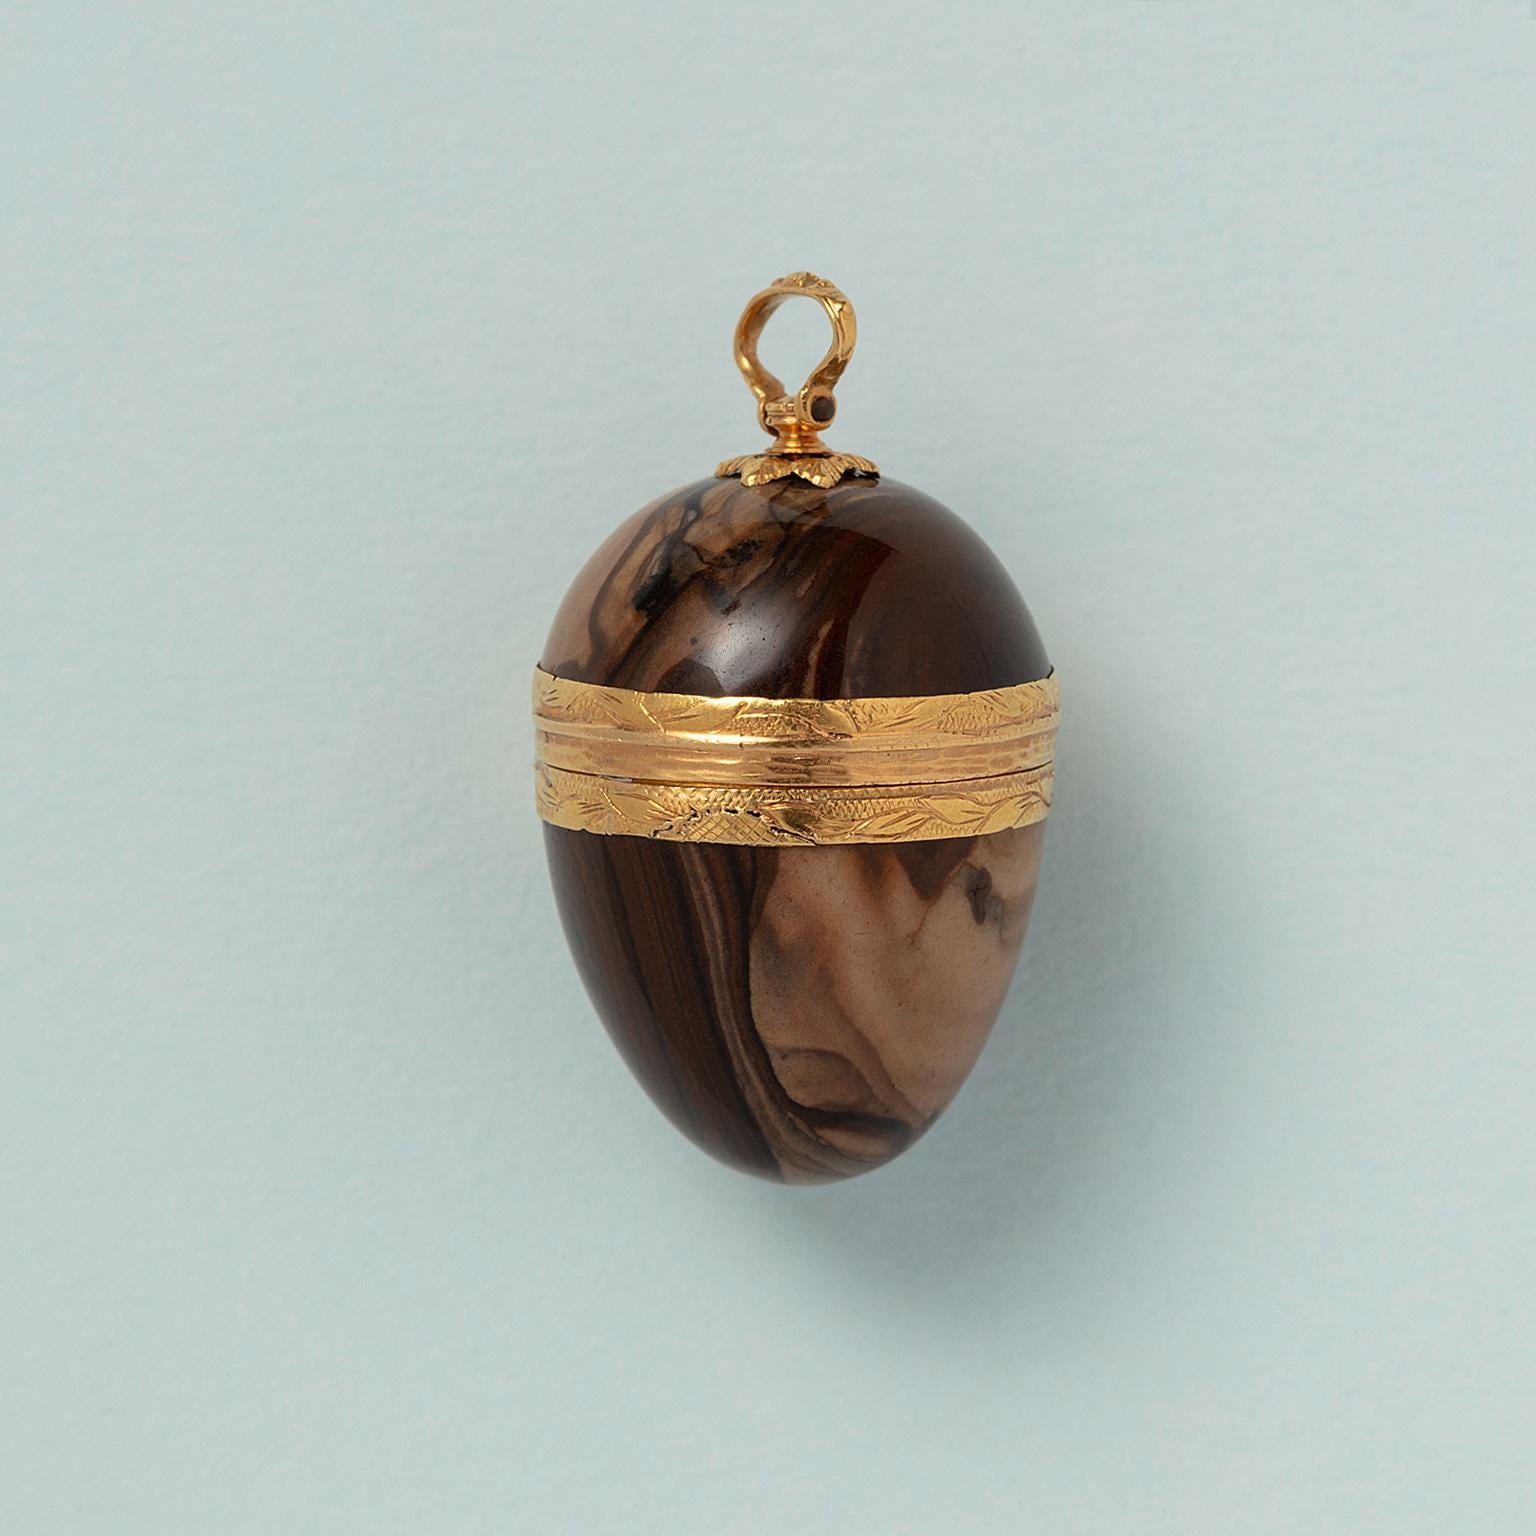 An 18 carat and jaspis egg box pendant with 18 carat gold mounting, the edges around and the hinge with which the box opens are engraved with leaves, France, 18th century.   

weight: 7.55 grams
dimensions: 1.8 cm x 2.5 cm